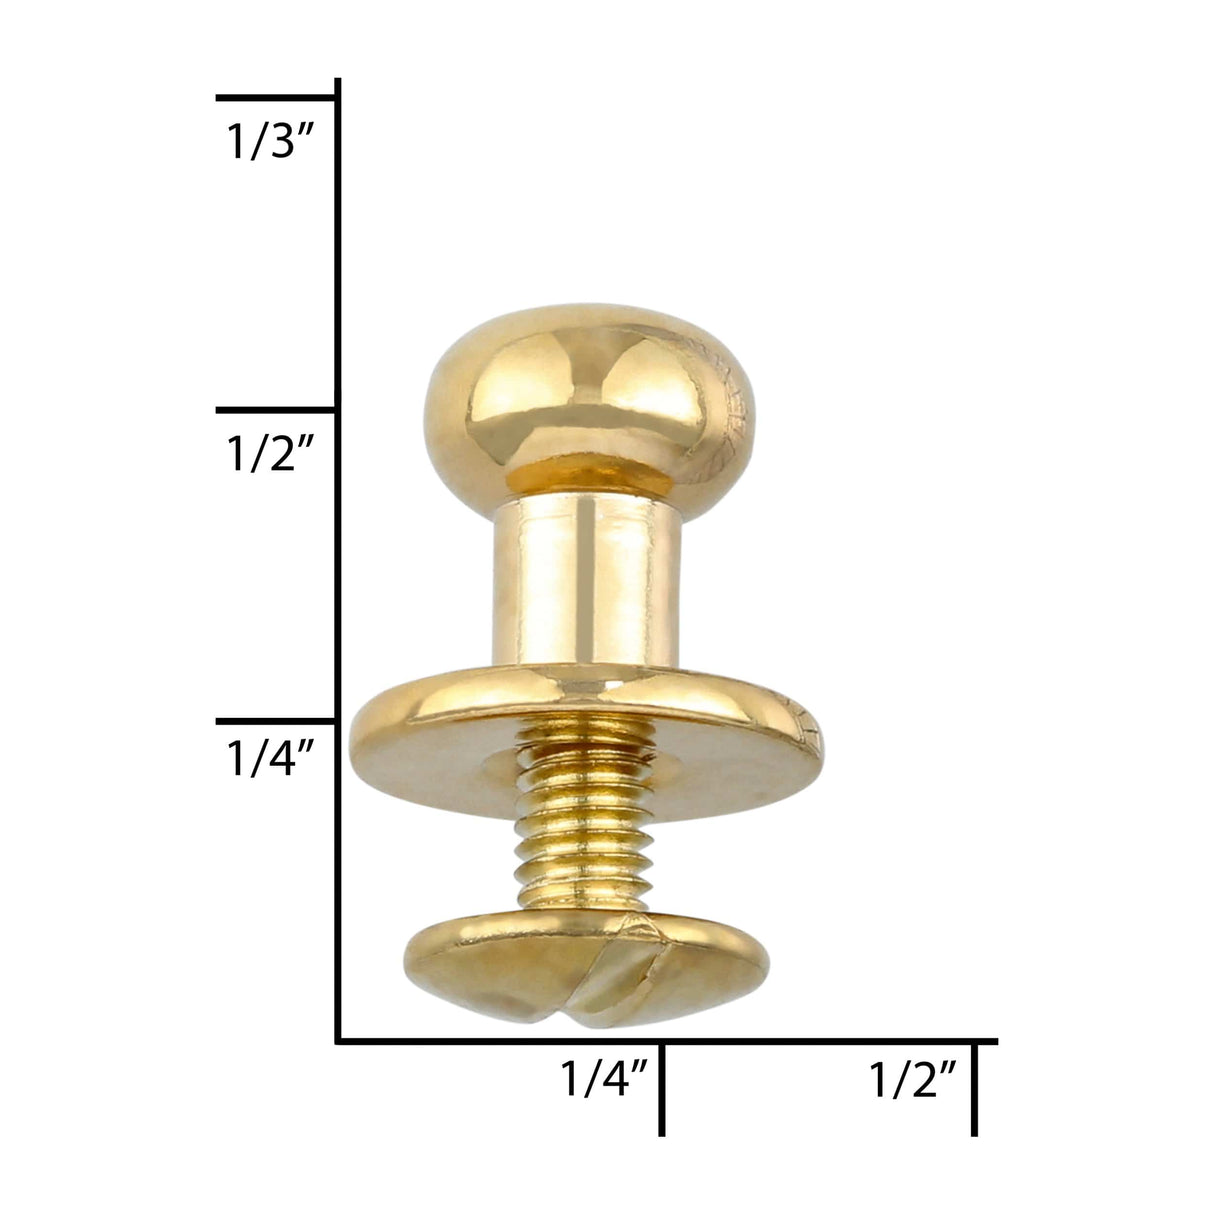 10mm, Shiny Gold, Flat Top Collar Button Stud with Screw, Solid Brass -  PK10, #P-1700-GOLD